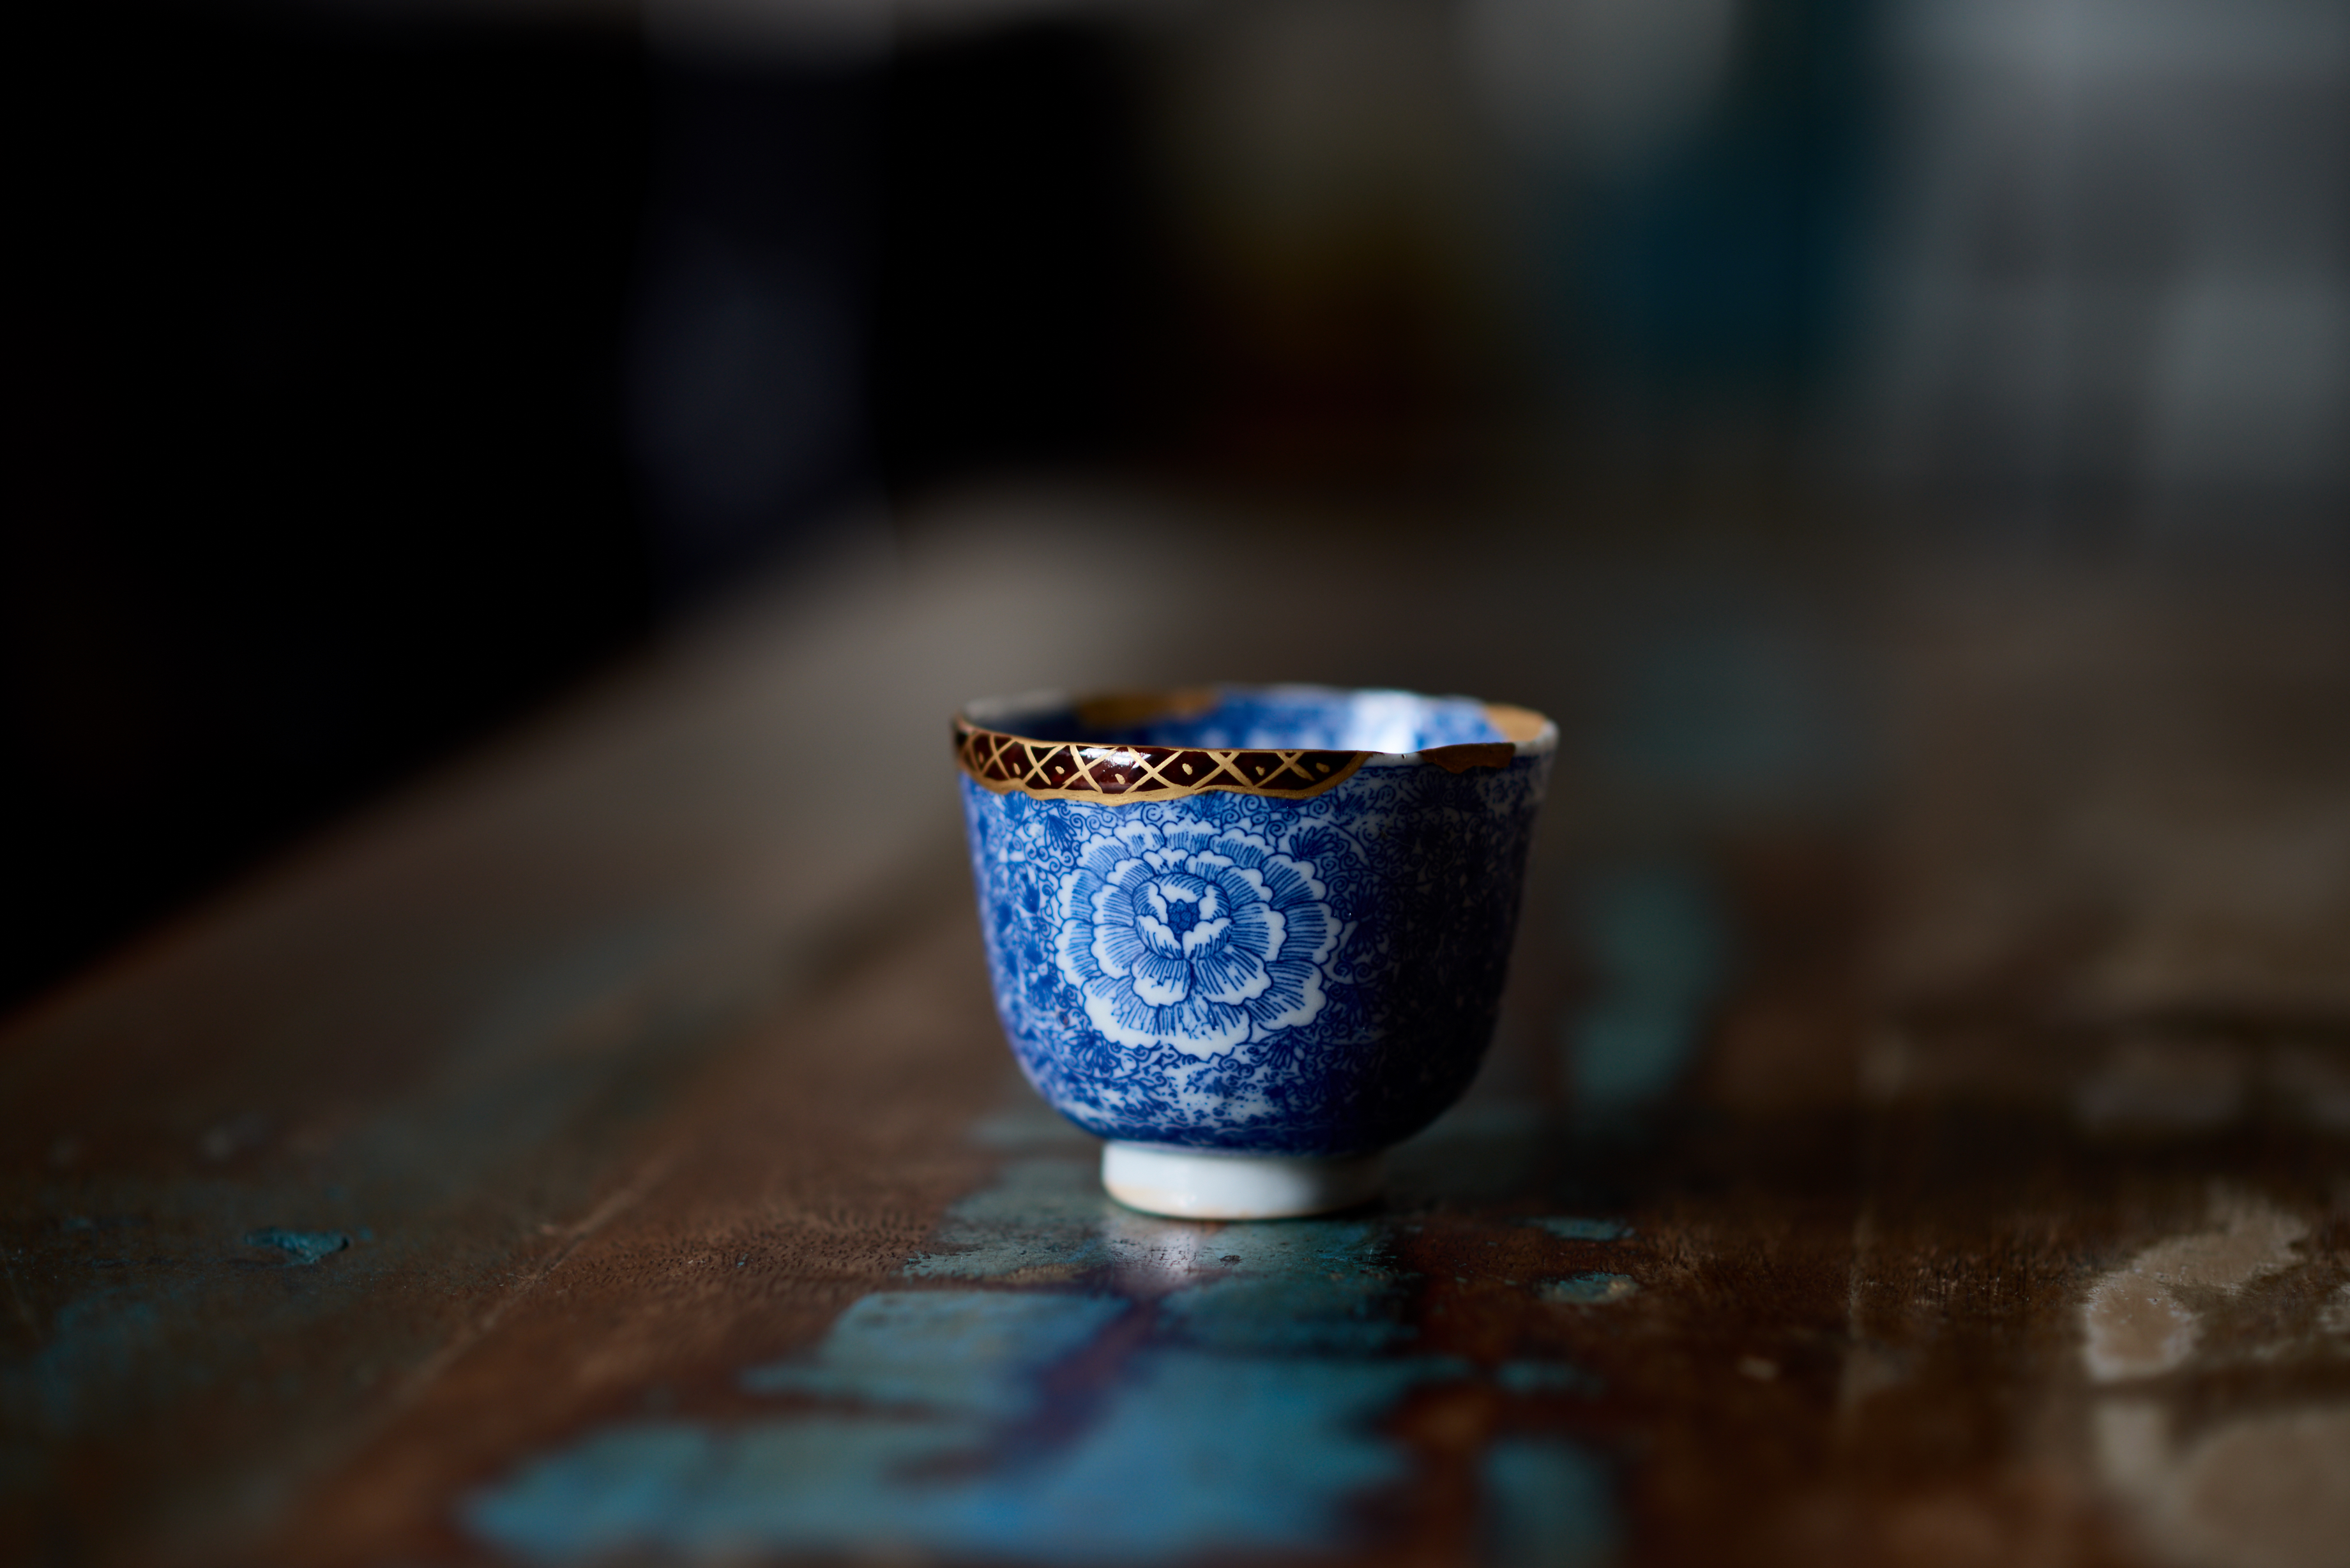 Cup mended with kintsugi technique